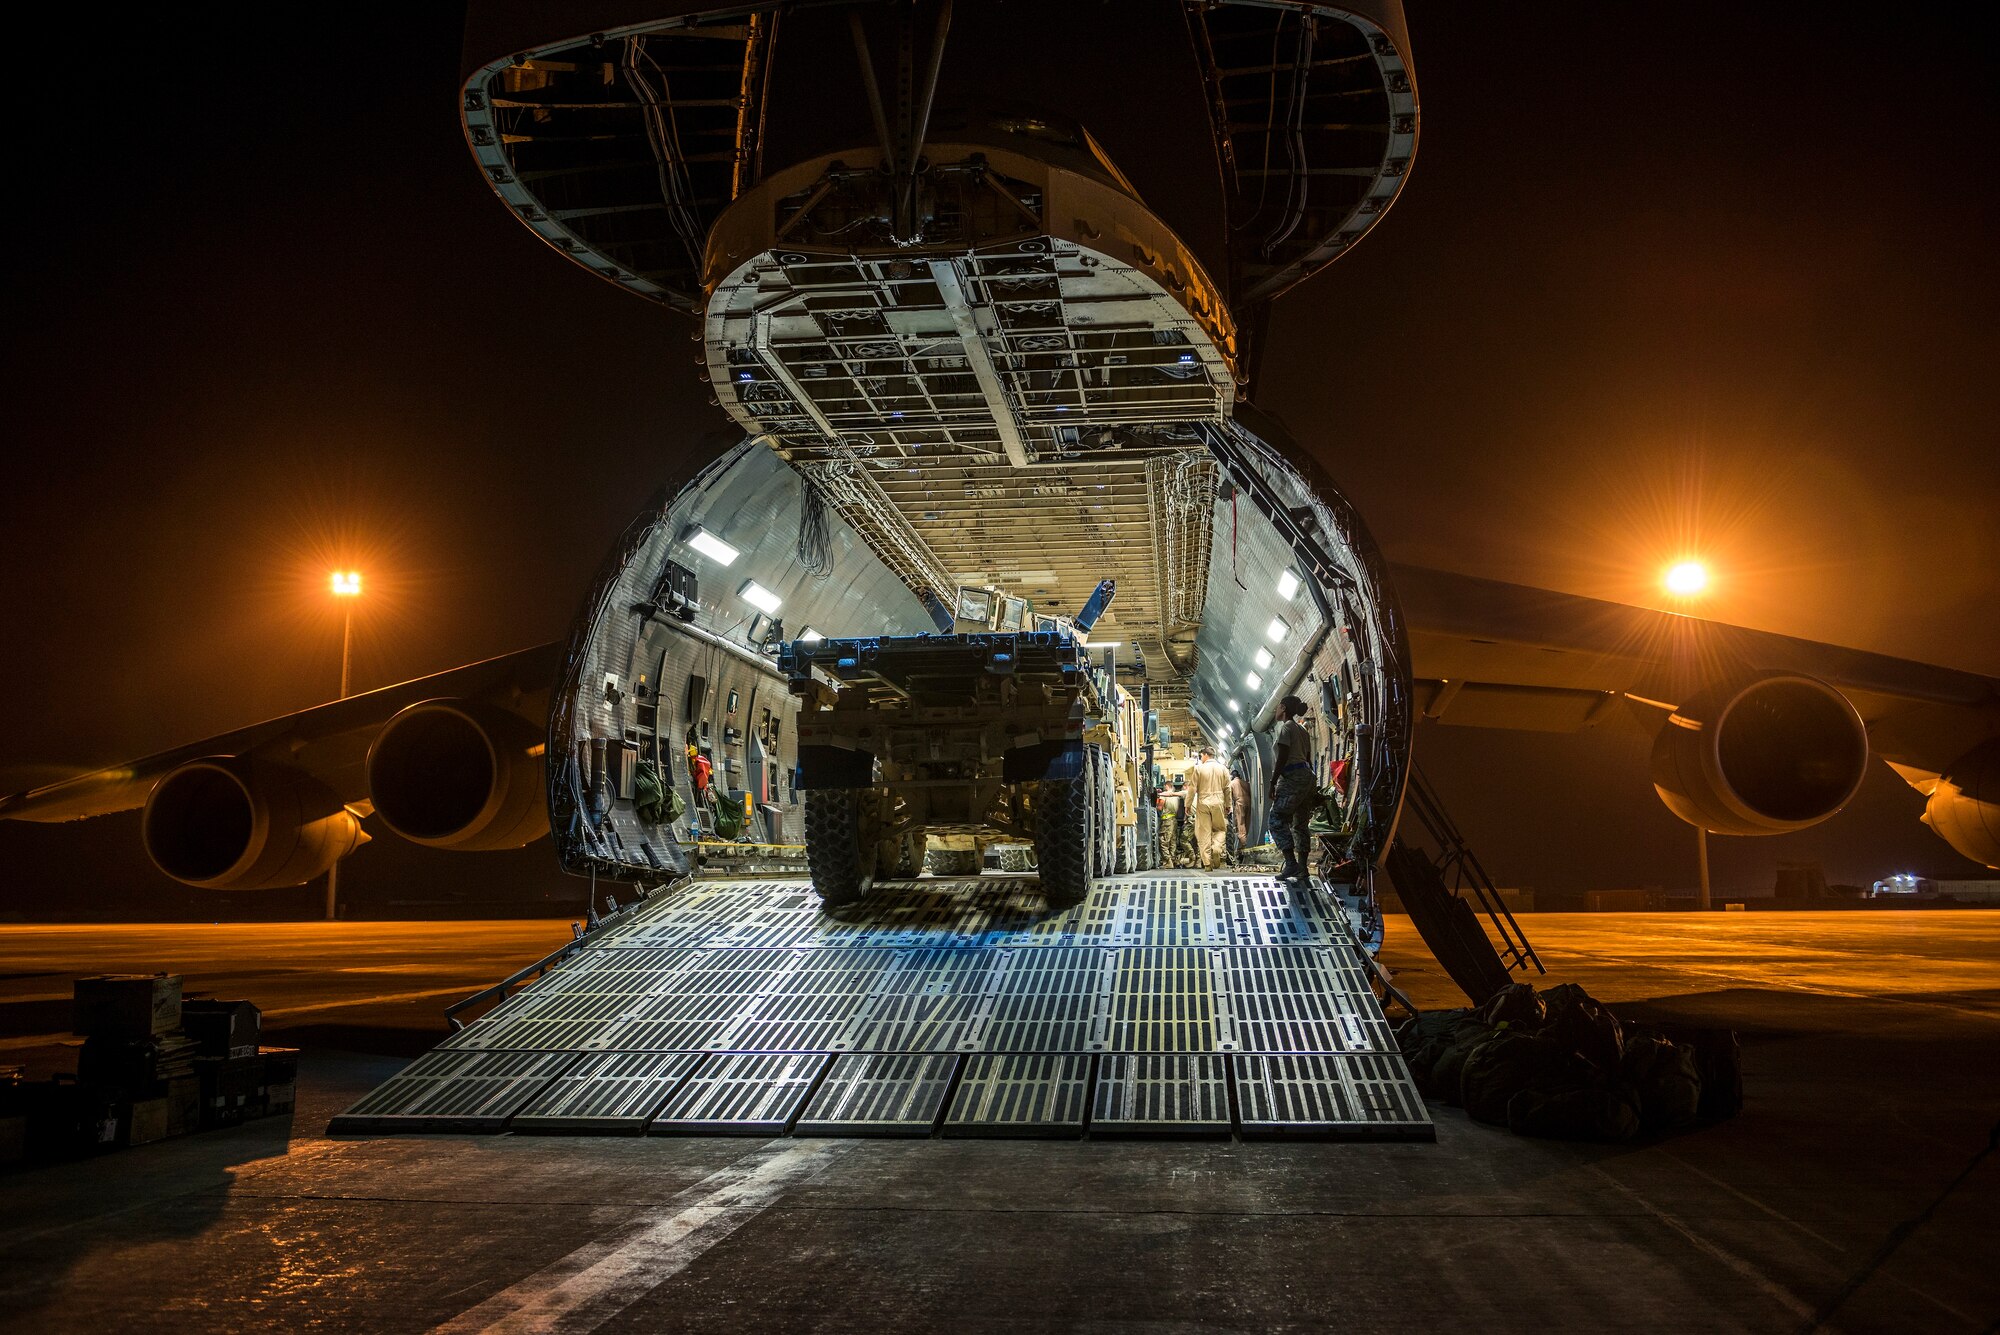 Airmen from the 9th Airlift Squadron and 455th Expeditionary Aerial Port Squadron with Marines from the Marine Expeditionary Brigade load vehicles into a C-5M Super Galaxy Oct. 6, 2014, at Camp Bastion, Afghanistan. Airmen and Marines loaded more than 266,000 pounds of cargo onto the C-5M as part of retrograde operations in Afghanistan. During this mission, the crew reached more than 11 million pounds of cargo transported in a 50-day period. (U.S. Air Force photo by Staff Sgt. Jeremy Bowcock)